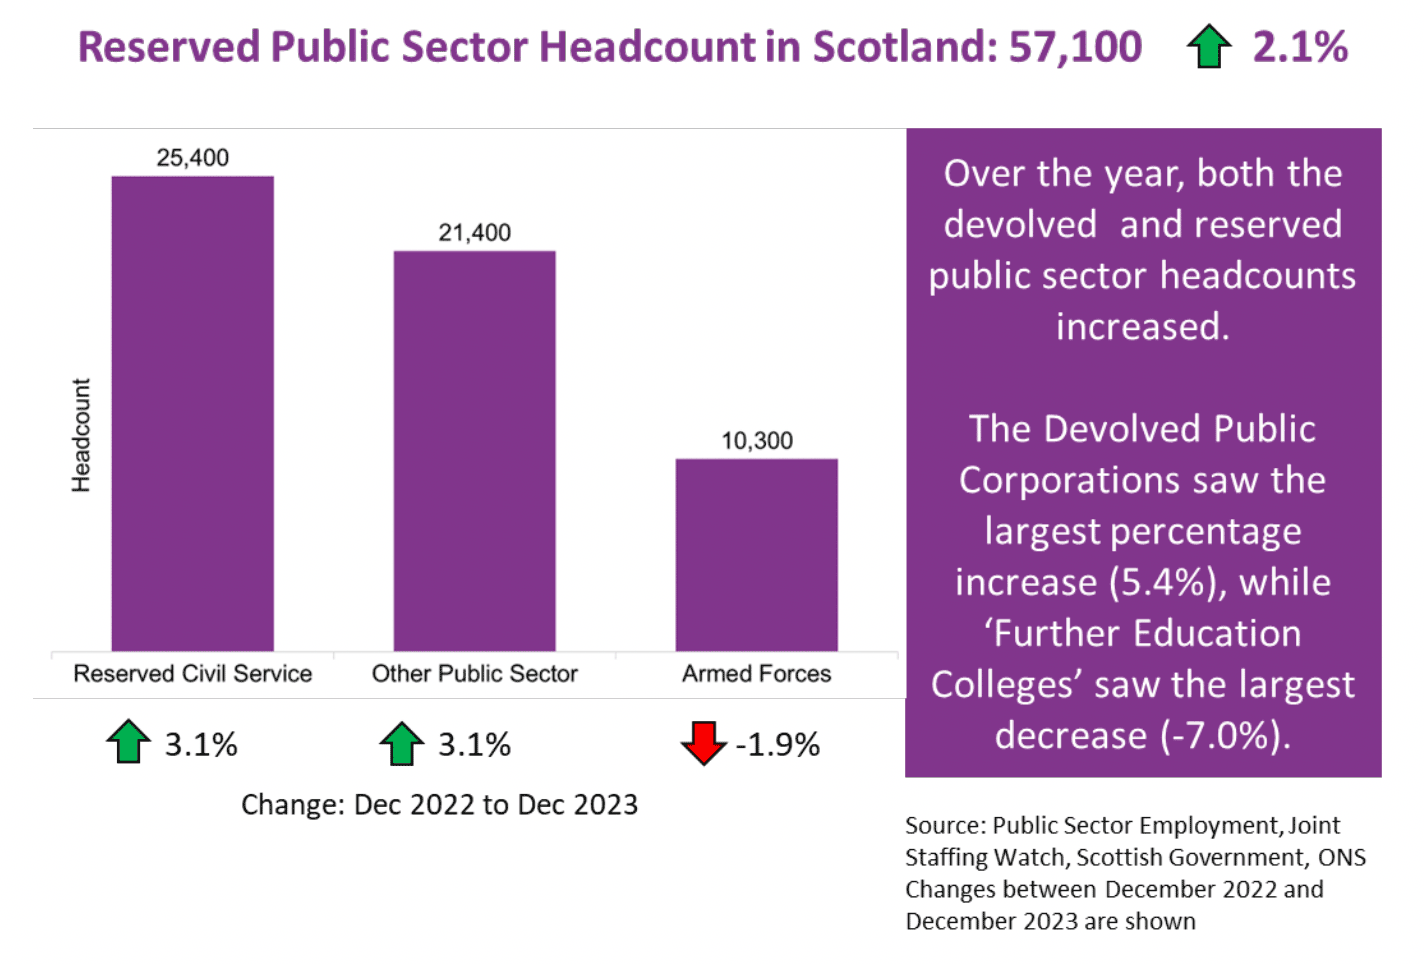 A figure showing total reserved public sector headcount in Scotland. Total headcount is 57,100, and has risen 2.1% over the year. Headcount is largest in the reserved civil service, at 25,400.